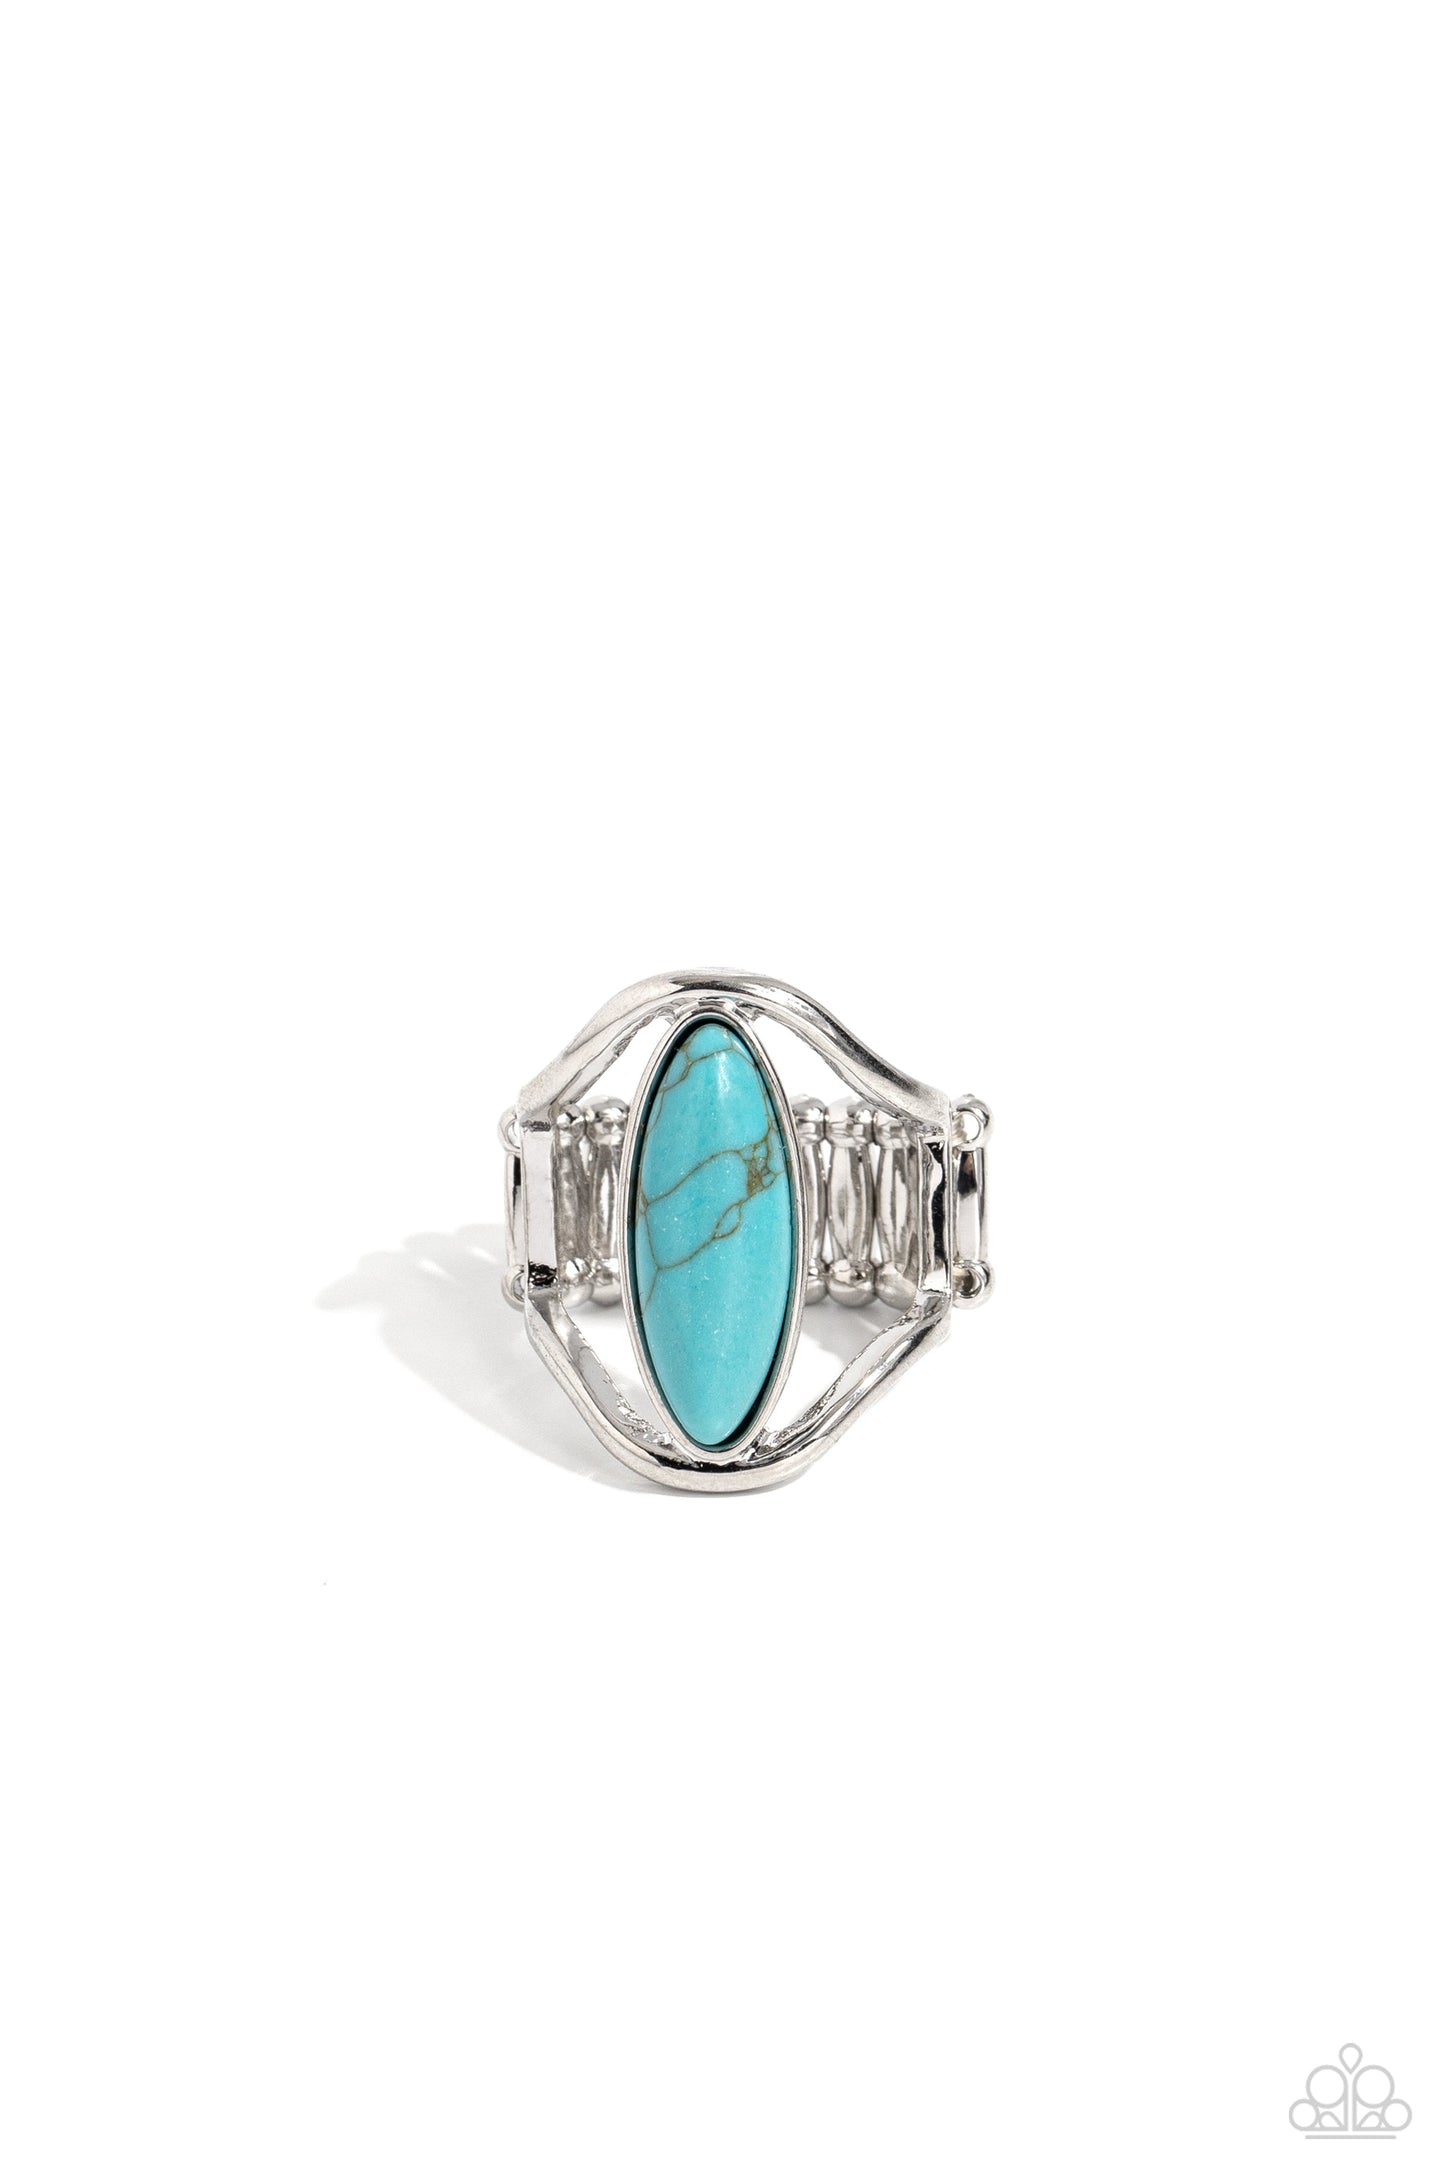 Spartan Stone - Blue Turquoise Ring - Paparazzi Accessories - An elongated turquoise oval stone sits between two shiny silver bands that arc around it, creating the illusion of a floating southwestern centerpiece. Features a stretchy band for a flexible fit.